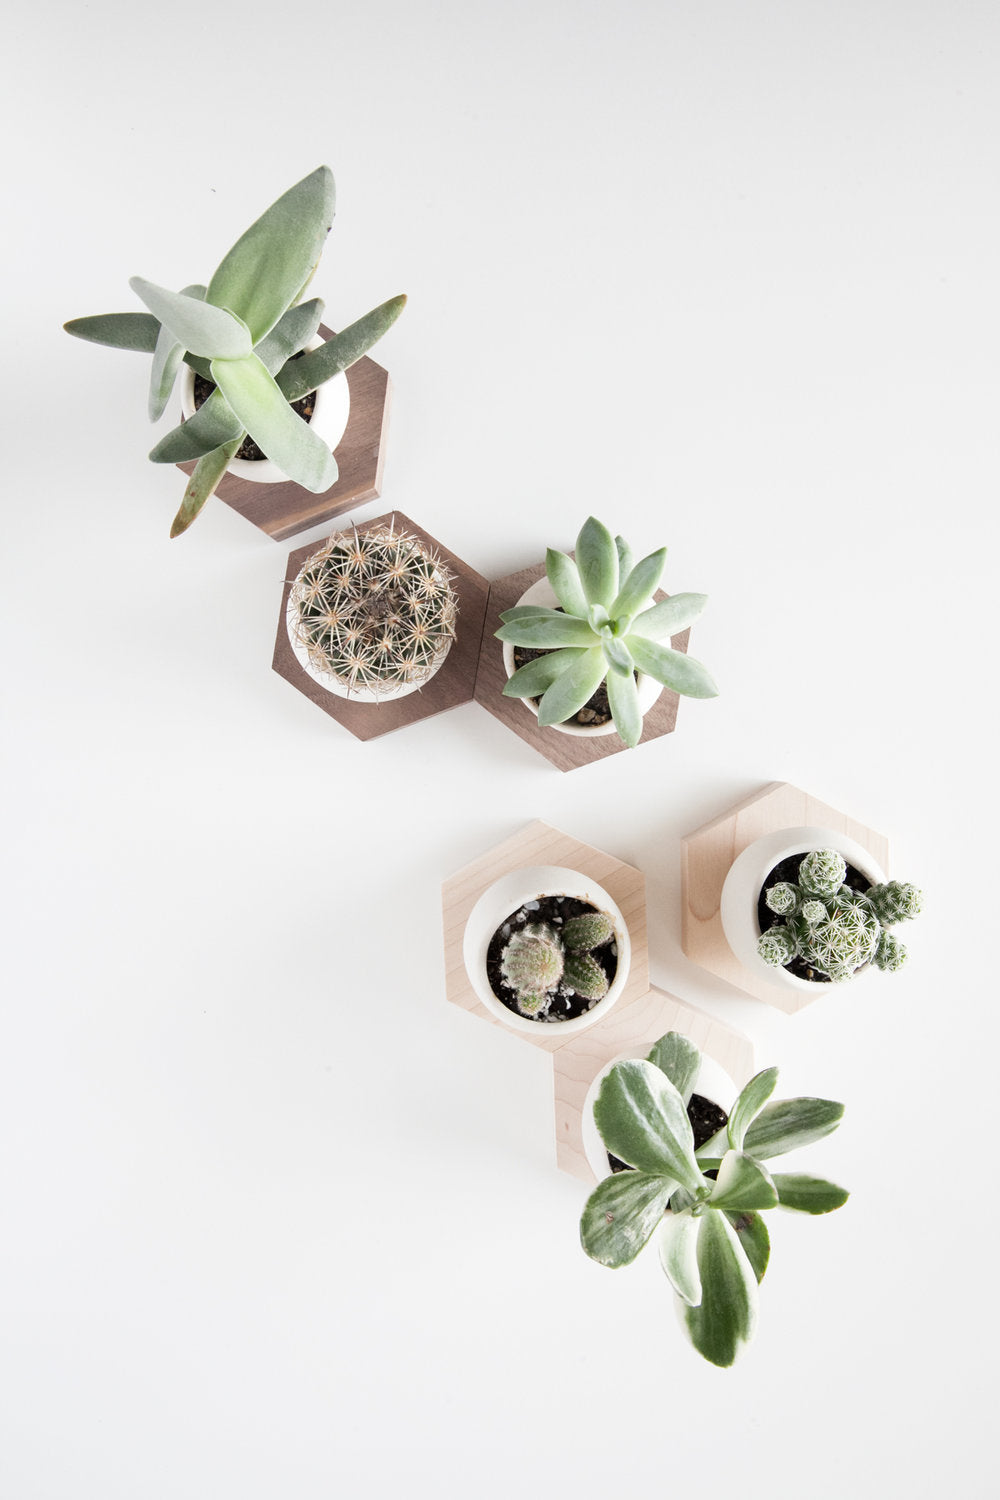 Modular arrangement of Hex Spora with succulents and cacti